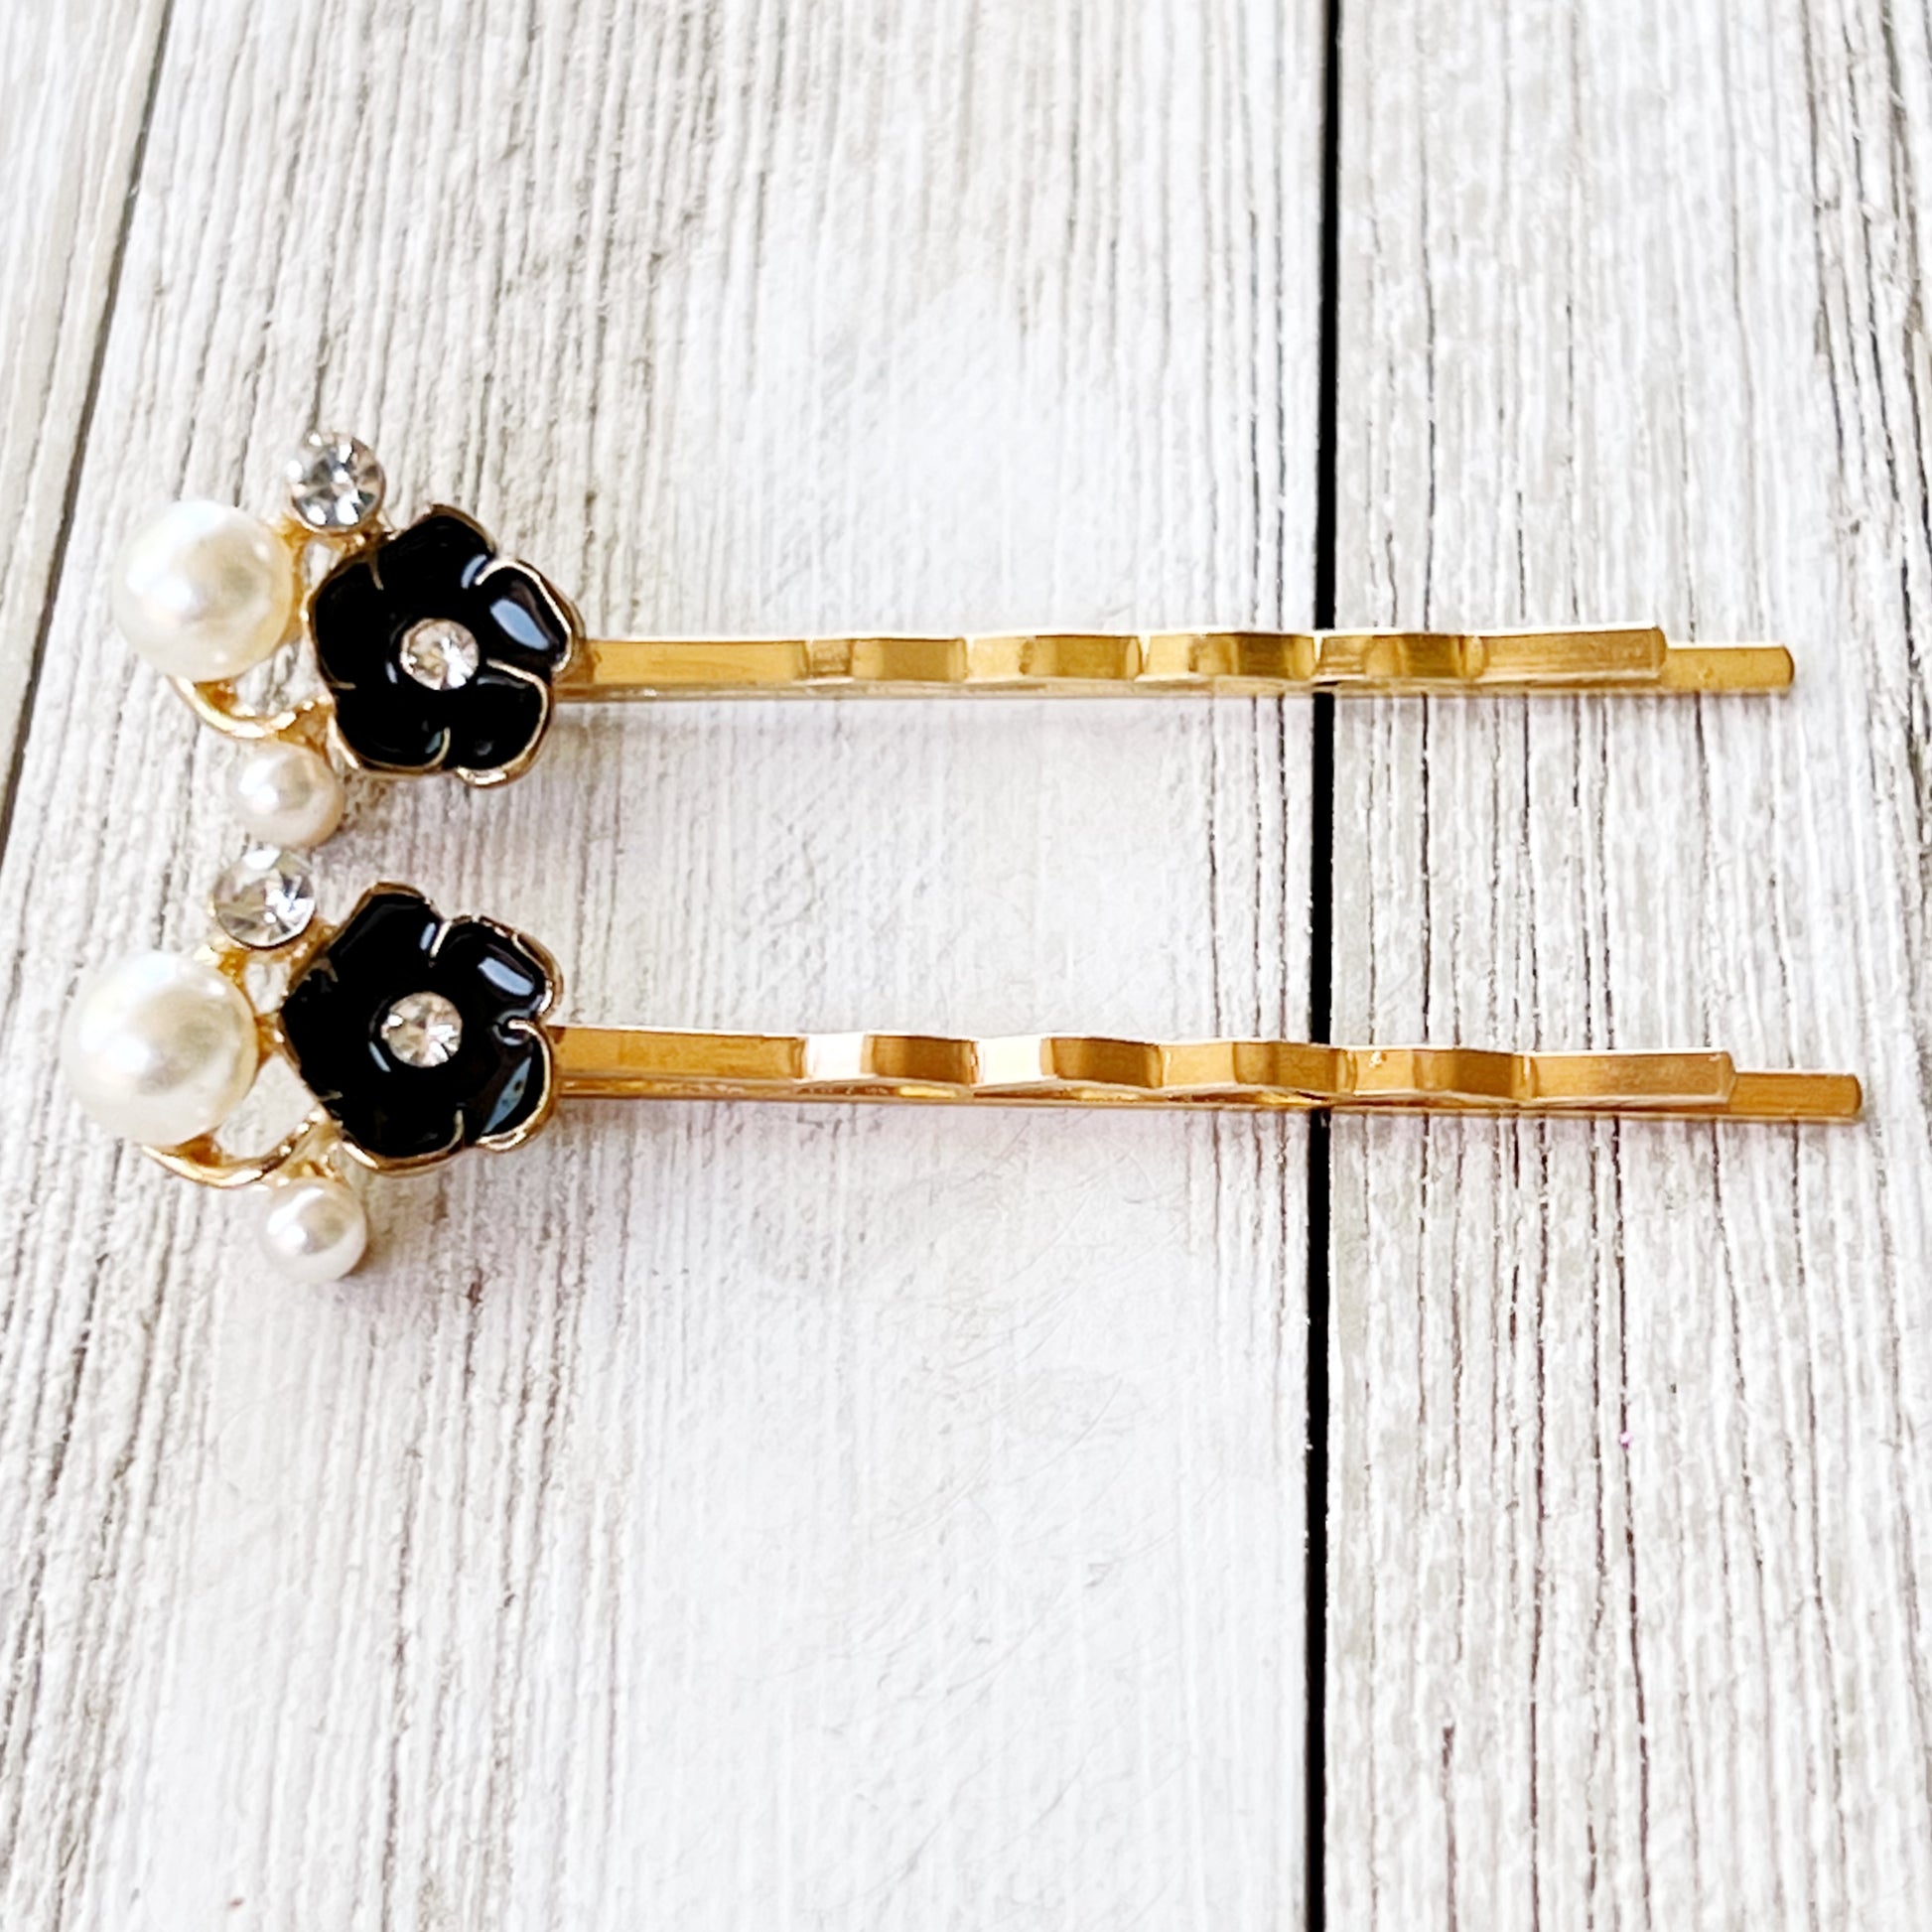 Black Flower Hair Pins - Floral Bobby Pins for Women's Hairstyles | Decorative Hair Accessories and Barrettes